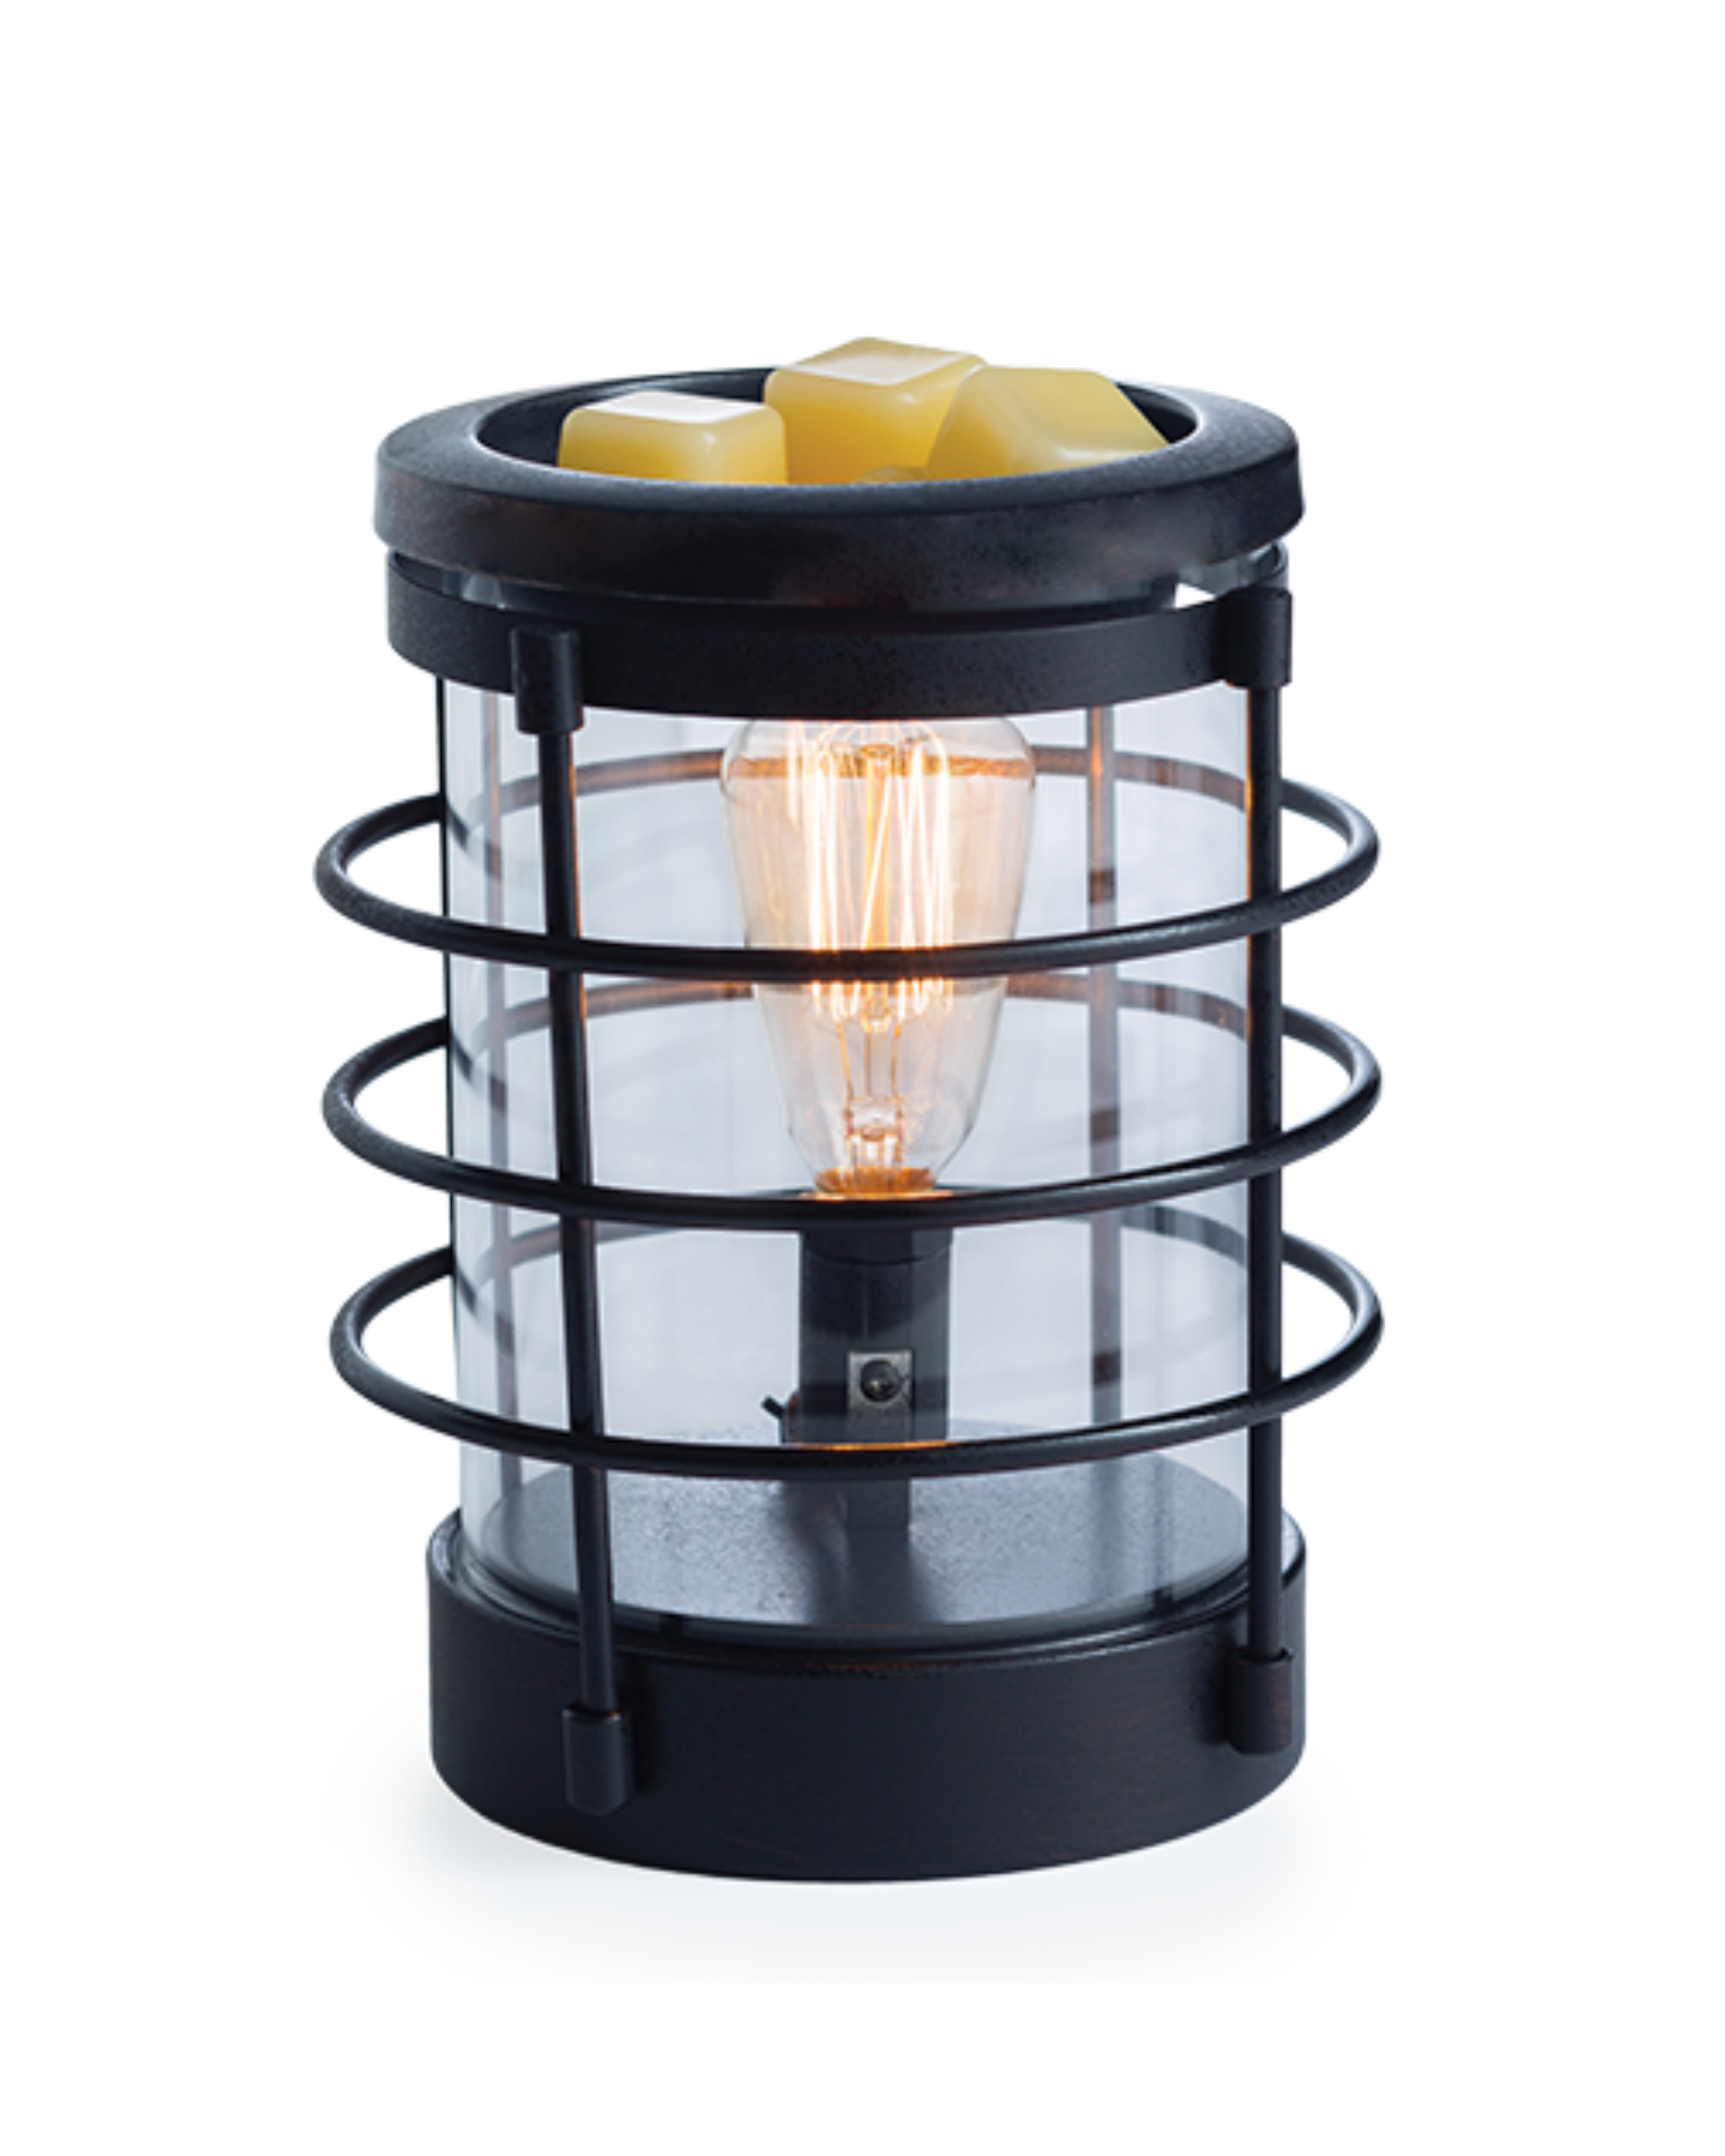 An updated traditional style with wire framing in a matte black finish give this Vintage Bulb Illumination a classic lantern feel. Illumination Fragrance Warmers use a Vintage Bulb to warm wax melts in the dish, releasing their fragrance.   Suggested Use: Simply add wax melts to the dish, turn it on, and enjoy your favorite fragrance as it spreads through the room. This warmer works beautifully with 100% Soy Wax Melts by Farmhouse Charm Candles Inc.